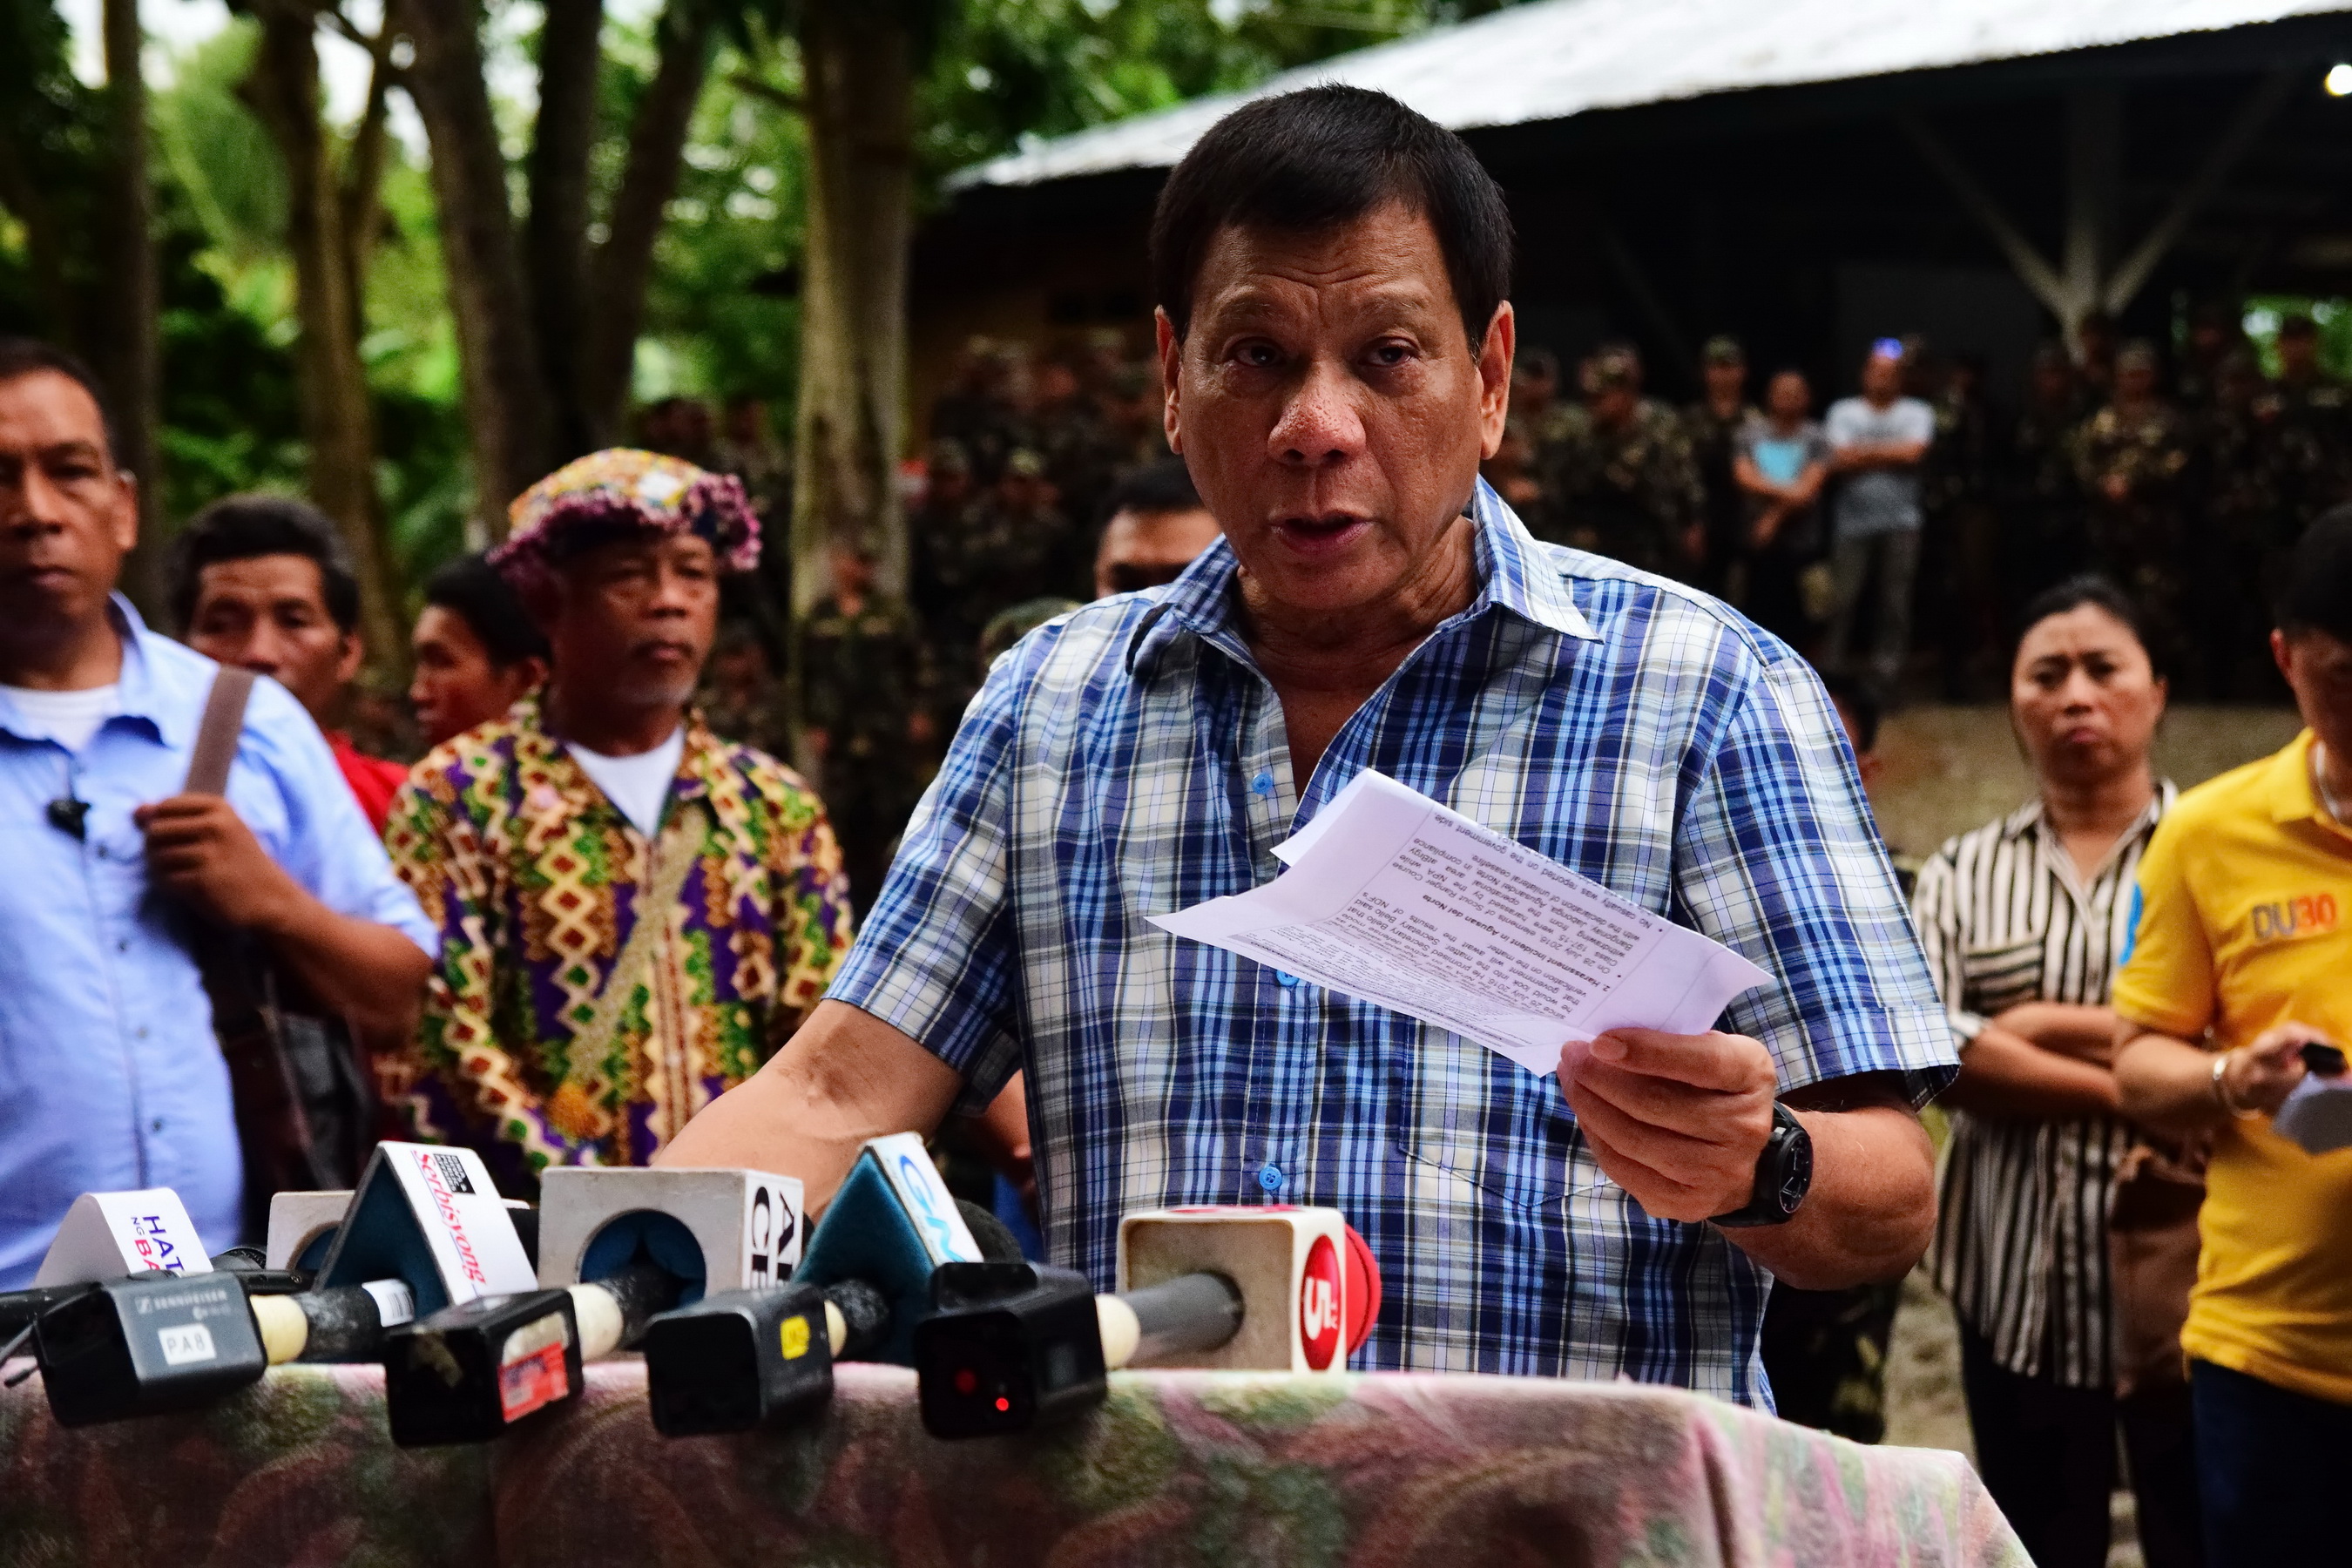 COSTLY. President Rodrigo R. Duterte says the Office of the President spends a minimum of P50,000 to a maximum of P250,000 for cash assistance to soldiers wounded or killed in war. Duterte visited the 60th Infantry Battalion Headquarters at Camp Morgia in Doña Andrea, Asuncion, Davao del Norte on Friday, July 29, 2016 where he met with the Cafgu Active Auxiliary forces who were injured in killed in an NPA attack. RENE LUMAWAG/PPD